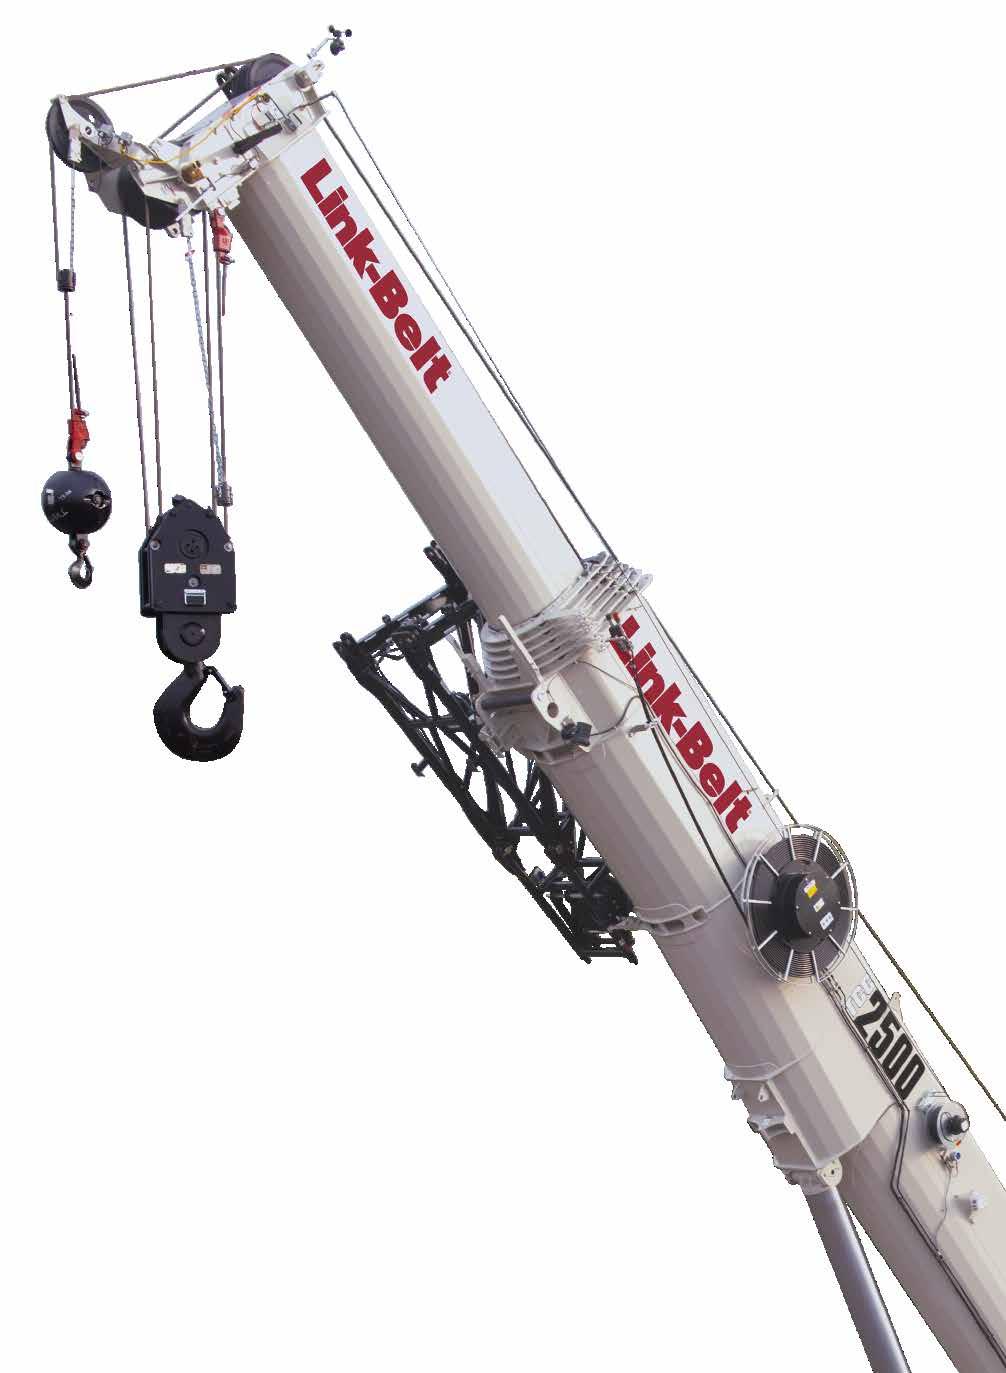 Operator aid features Operator settable alarms with function kick-out include left and right slew angle, maximum & minimum boom angle, head height, load